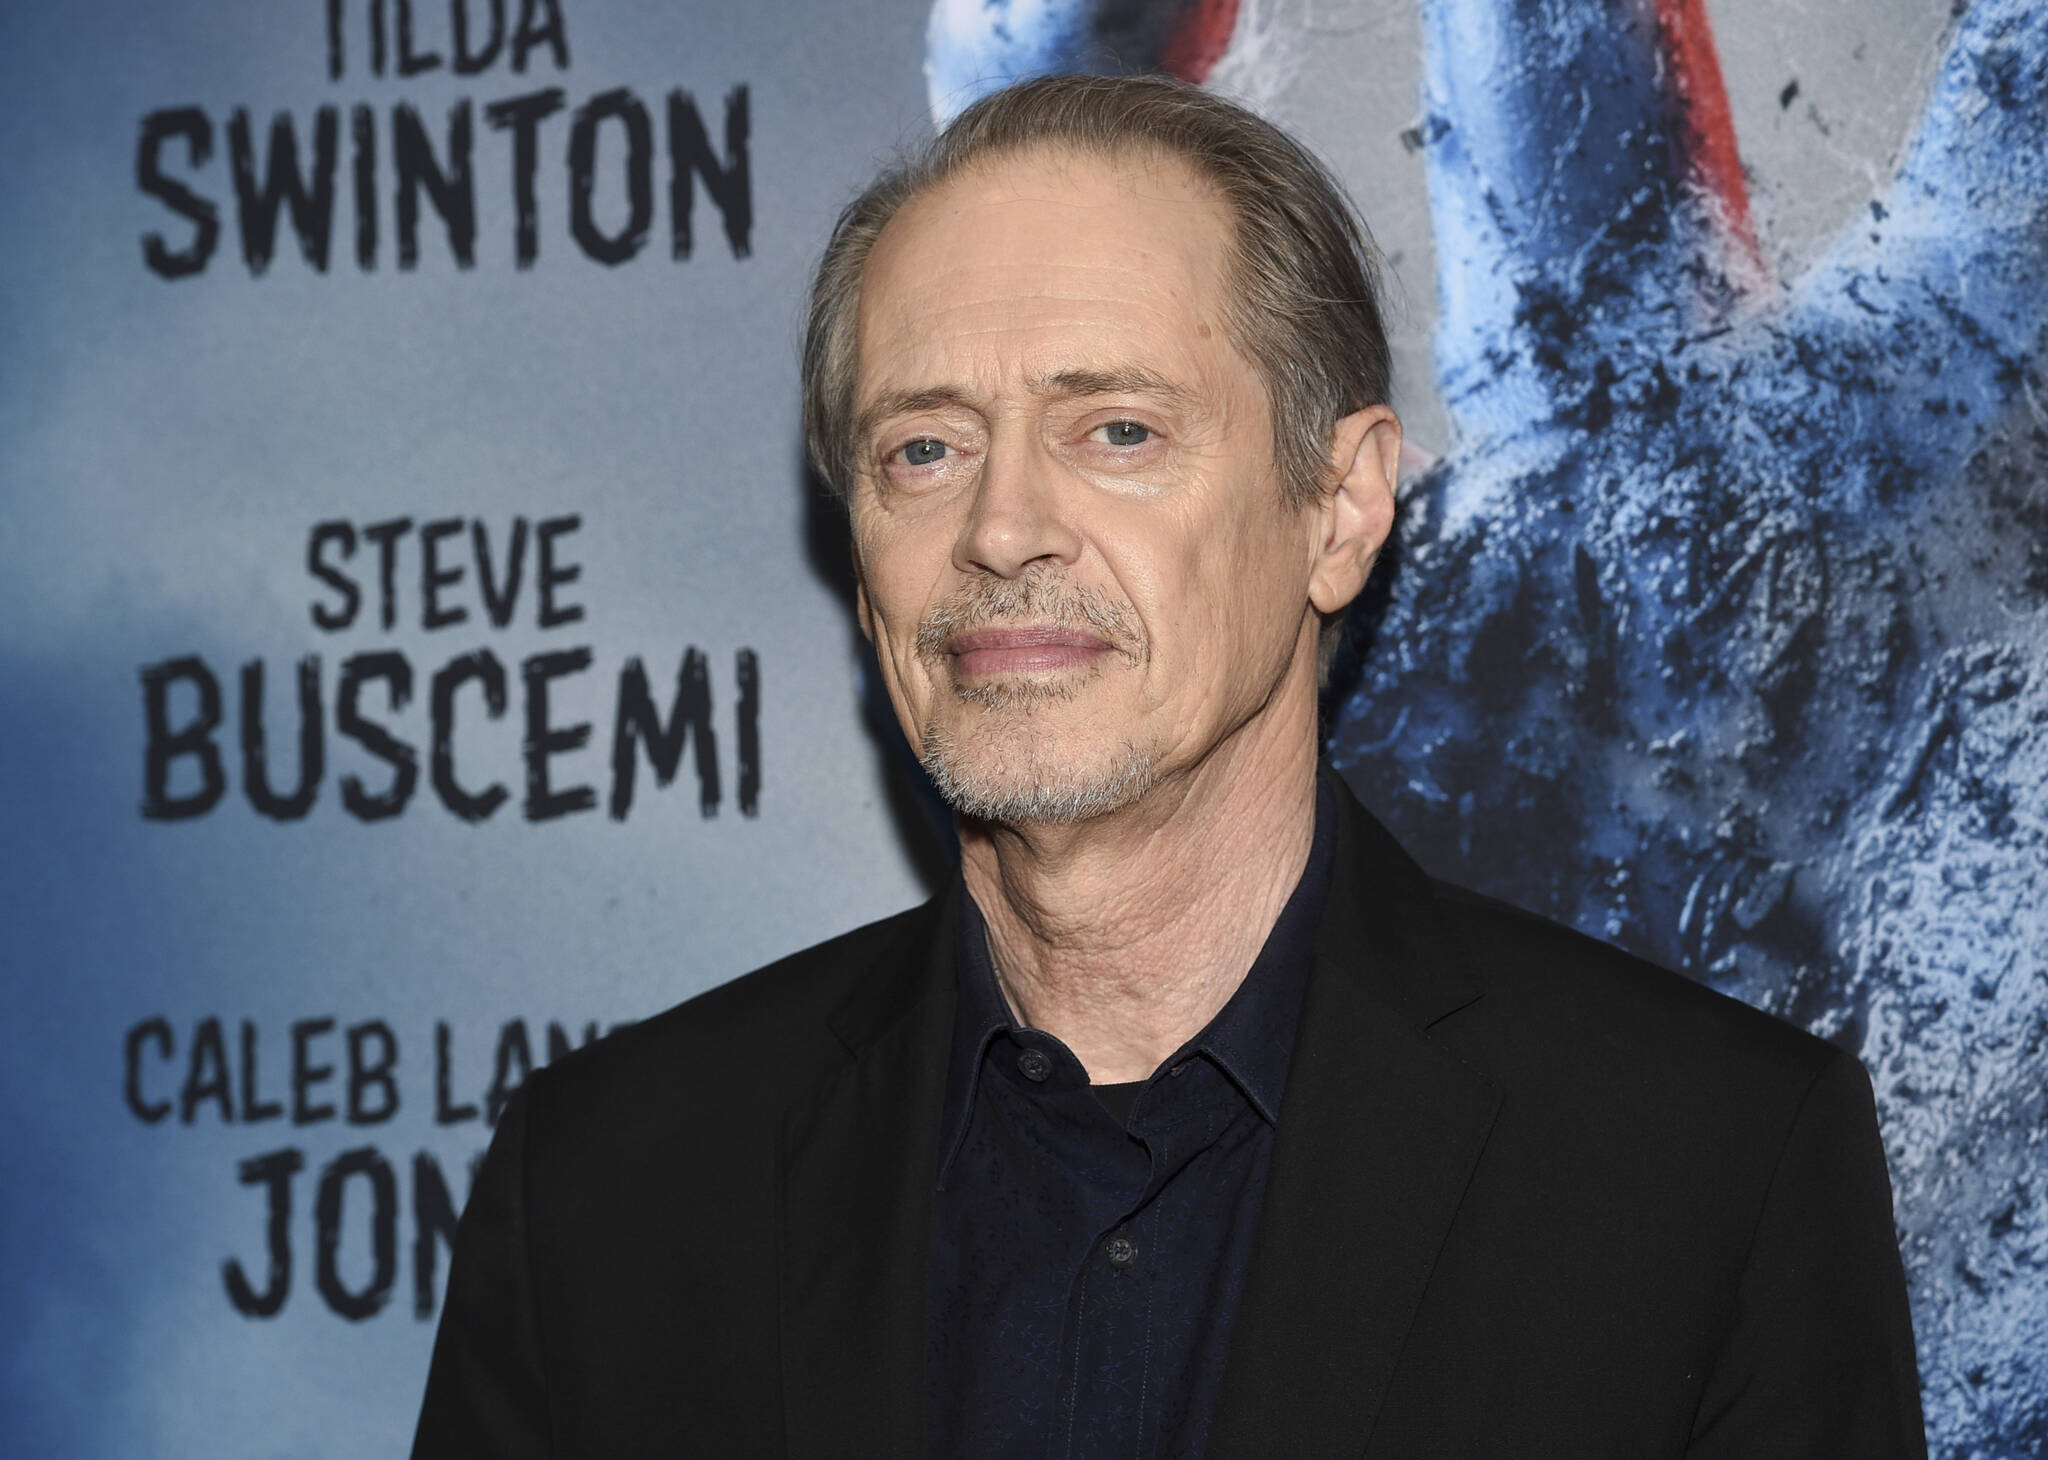 FILE - Actor Steve Buscemi attends the premiere of “The Dead Don’t Die” at the Museum of Modern Art, June 10, 2019, in New York. Buscemi was punched in the face by a random attacker on a New York City street, Wednesday, May 8, 2024, according to police and his publicist. (Photo by Evan Agostini/Invision/AP, File)